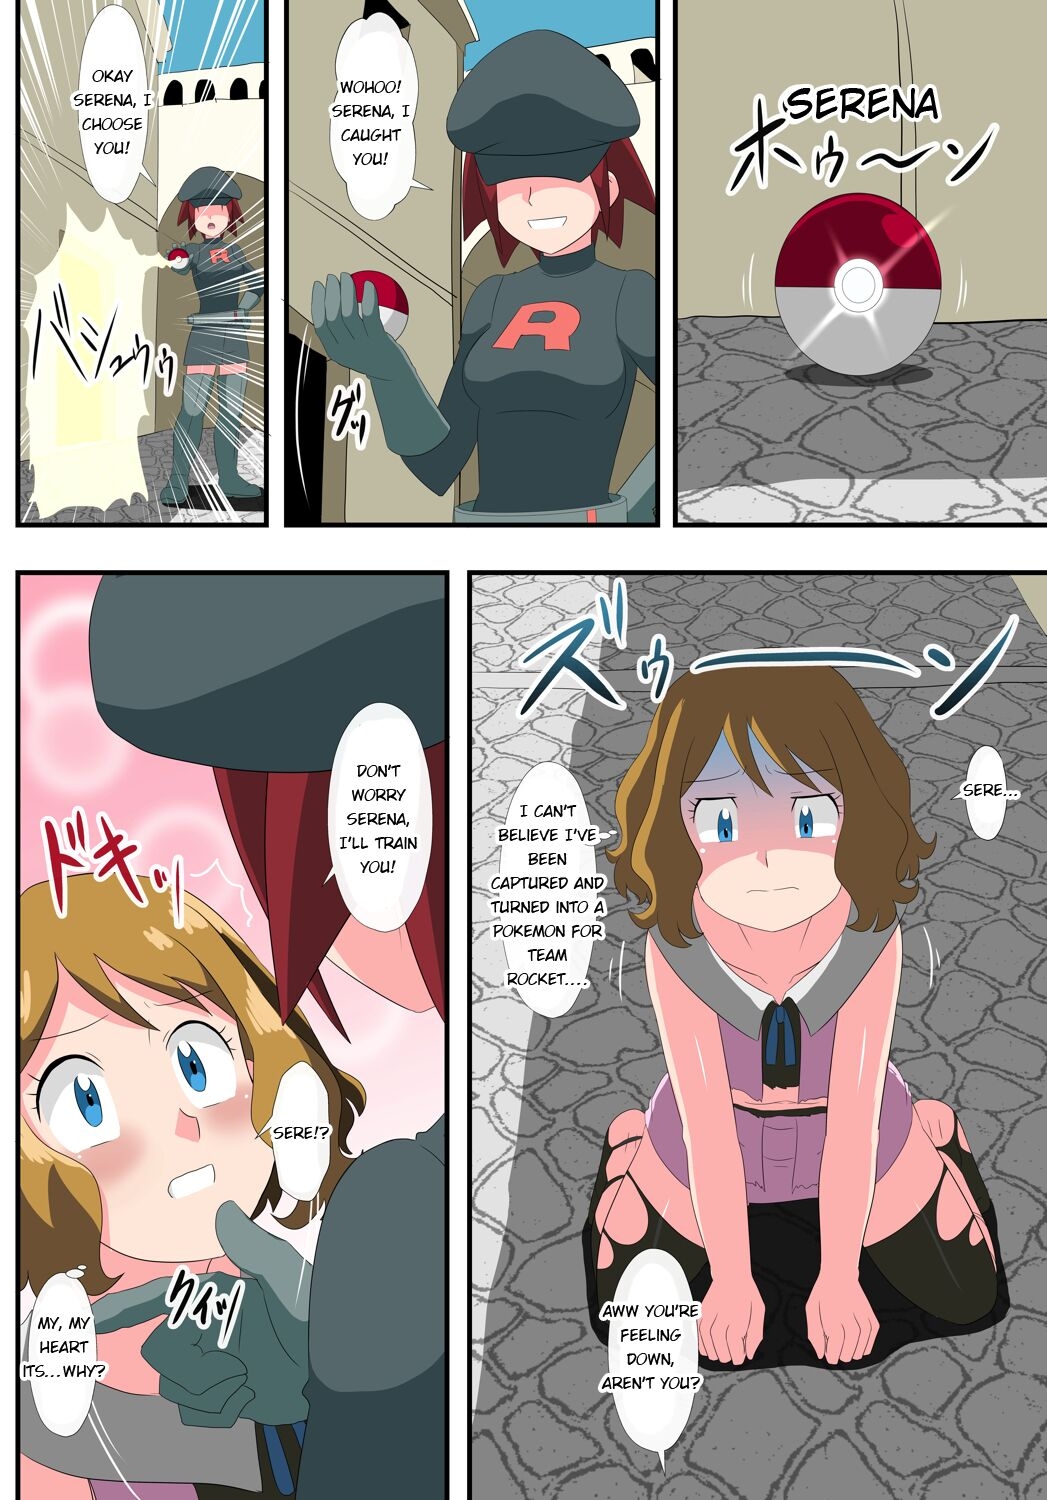 [shinenkan] Book of Serena:  They thought I was a pokemon and captured me! 5